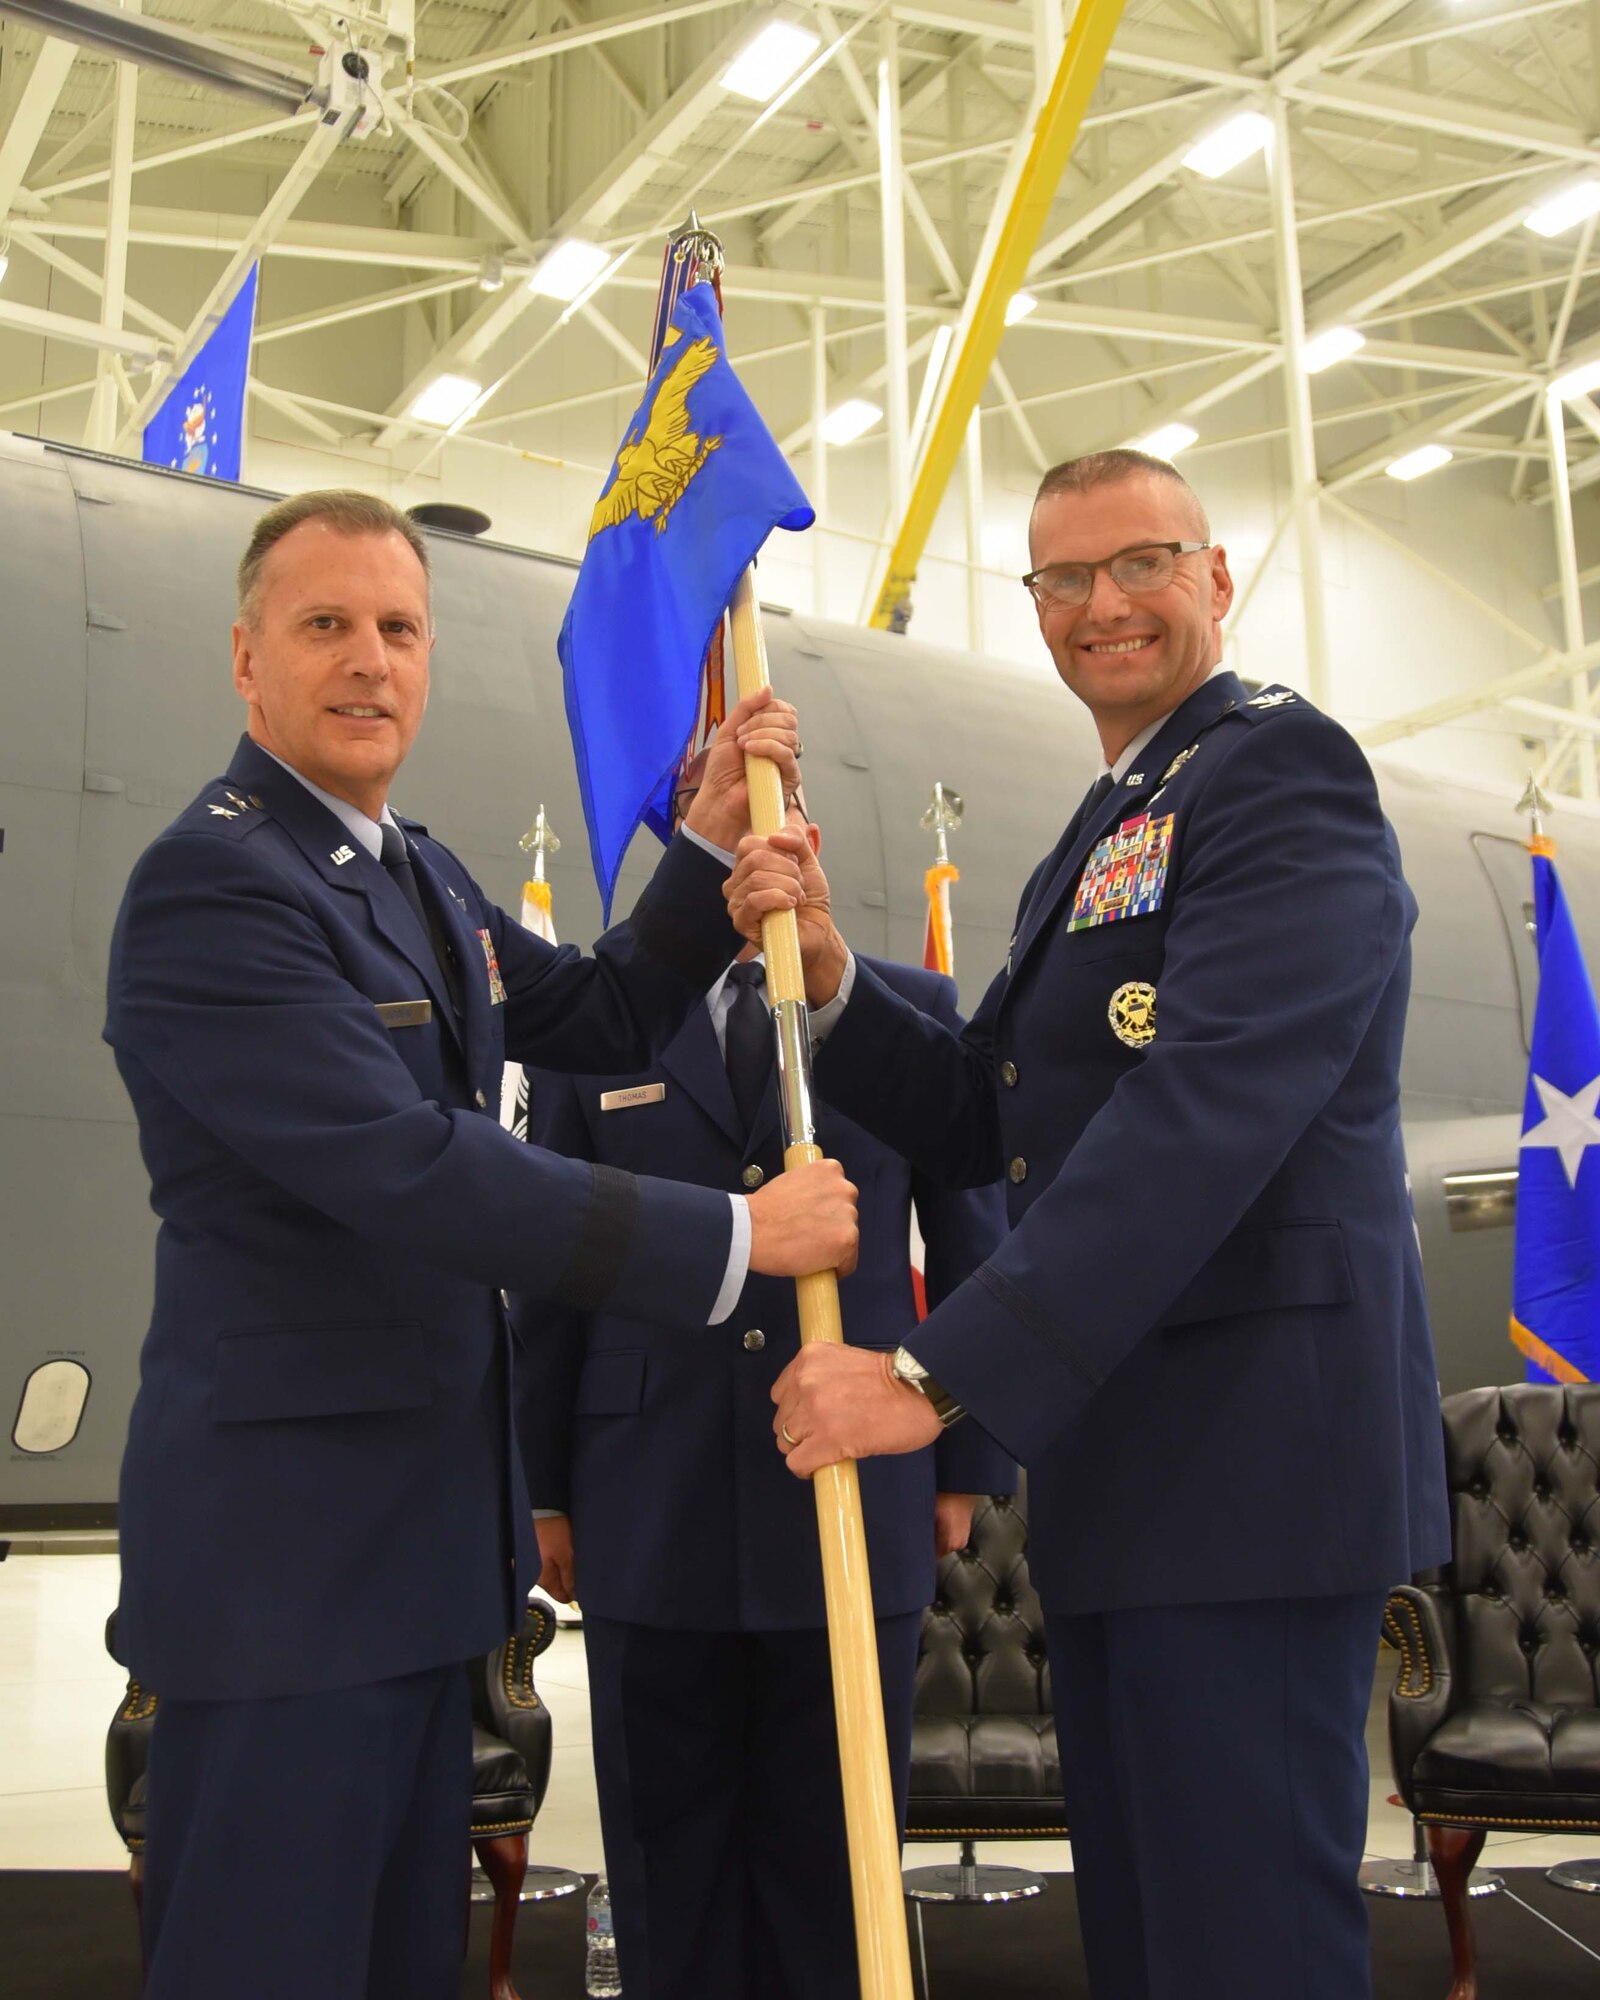 Maj. Gen. Randall A. Ogden, 4th Air Force commander, hands the guidon to Col. Phil Heseltine, incoming 931st Air Refueling Wing commander, during a change of command ceremony Dec. 1, 2018, McConnell Air Force Base, Kan.  Prior to joining the 931st, Heseltine was the vice commander of the 22nd Air Refueling Wing, the active duty component at Team McConnell.  Heseltine is the first colonel to retire from the active duty to join the Air Force Reserve as a wing commander. (U.S. Air Force photo by Tech. Sgt. Abigail Klein)